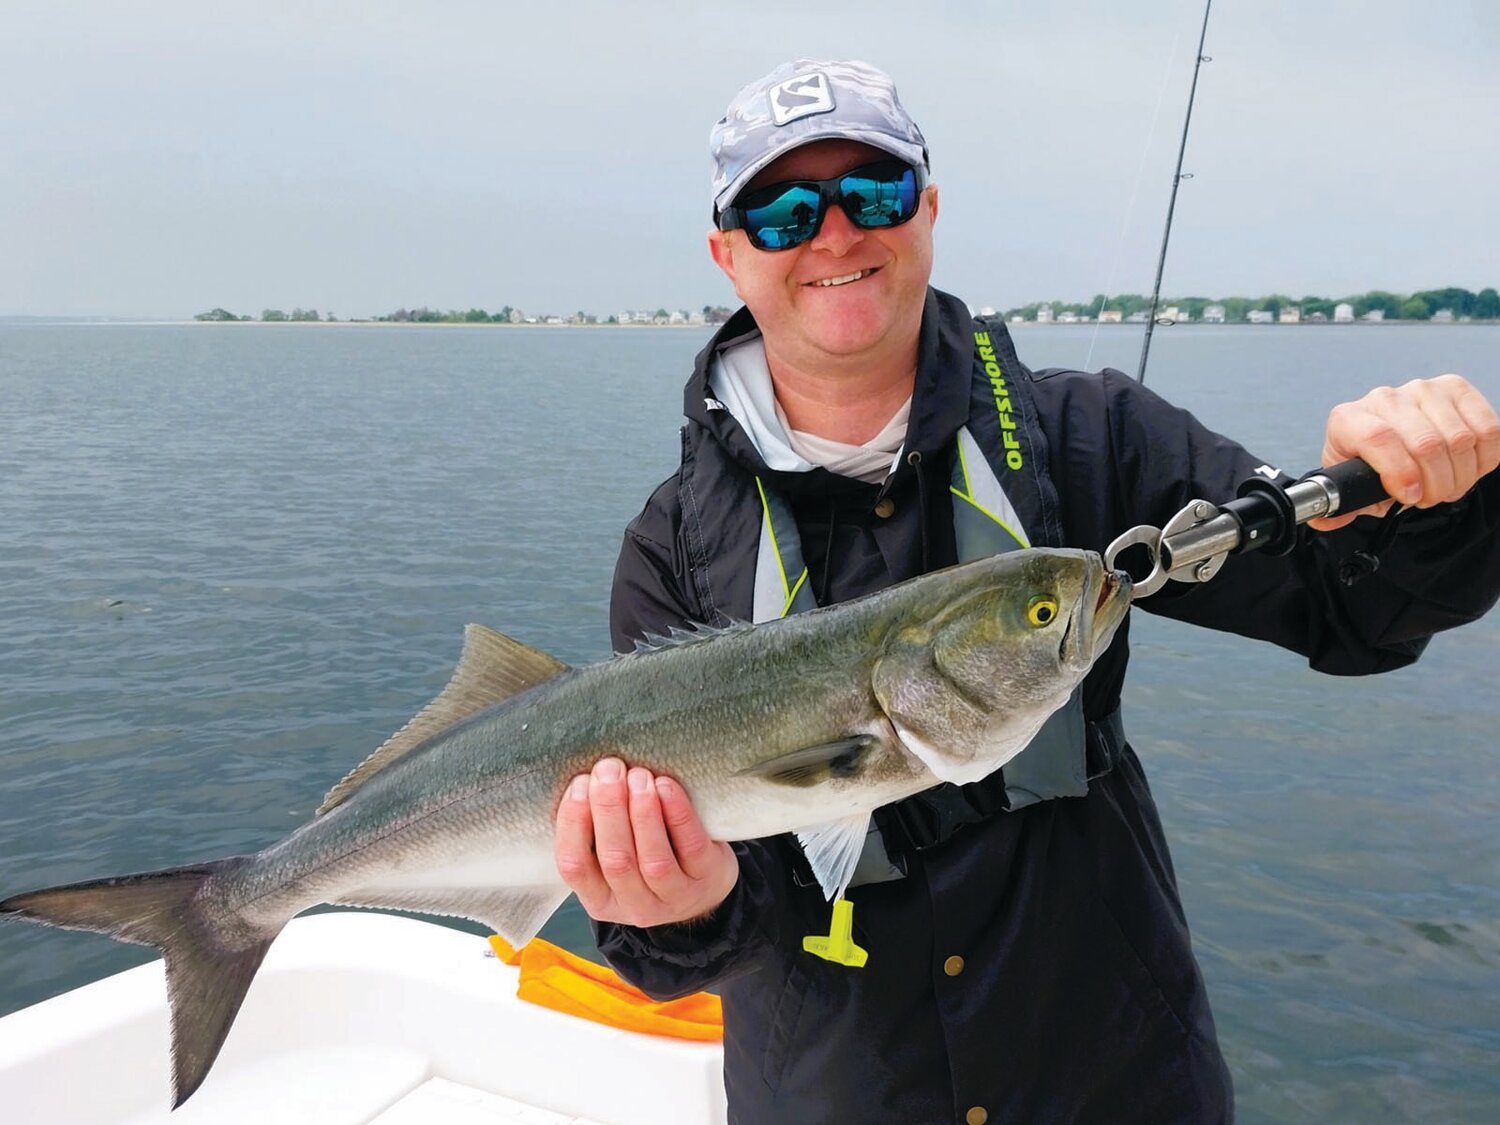 NOT SINGING THE BLUES: Brandon Davis said, “These bluefish are large compared to what we have in Chesapeake Bay, Maryland area.  And they are a lot of fun to catch.”